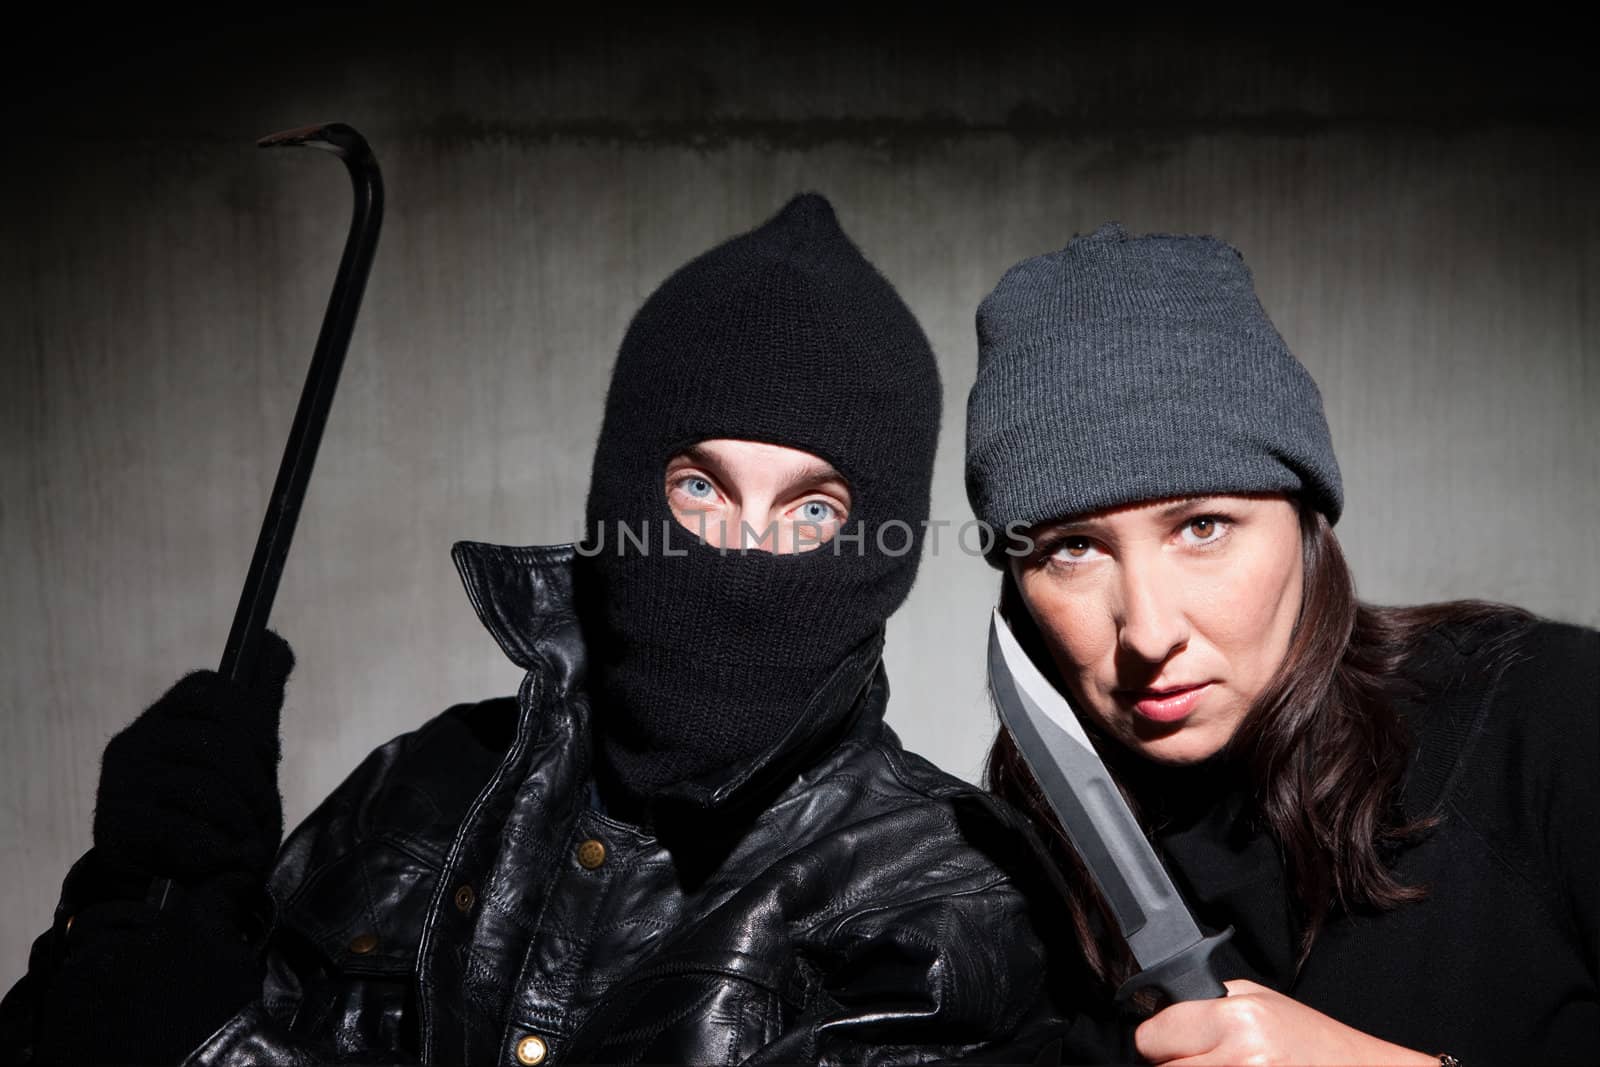 Male and female criminals wielding dangerous weapons